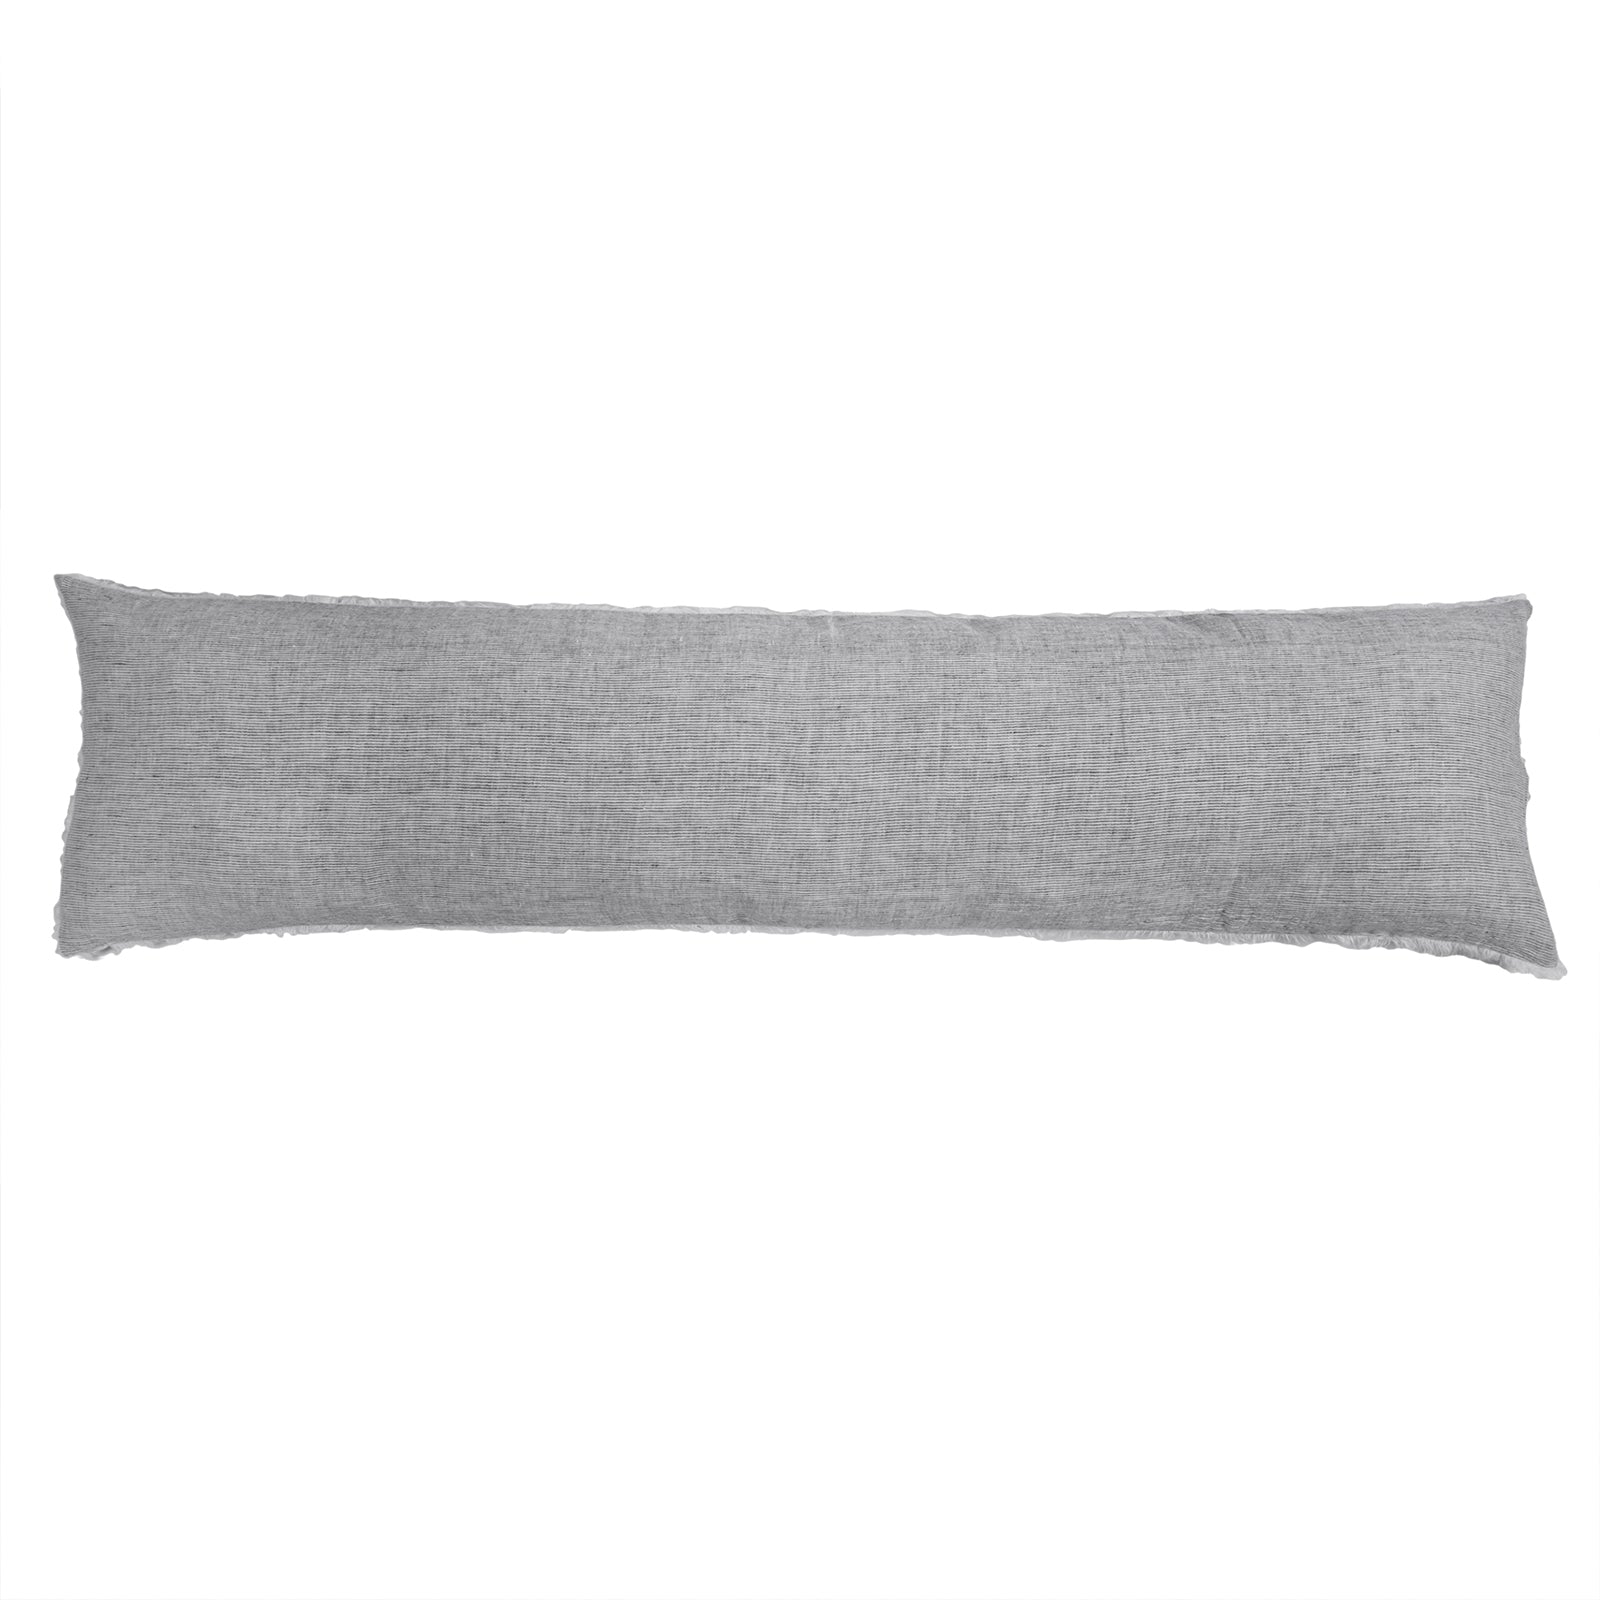 logan - charcoal color - body pillow - pom pom at home